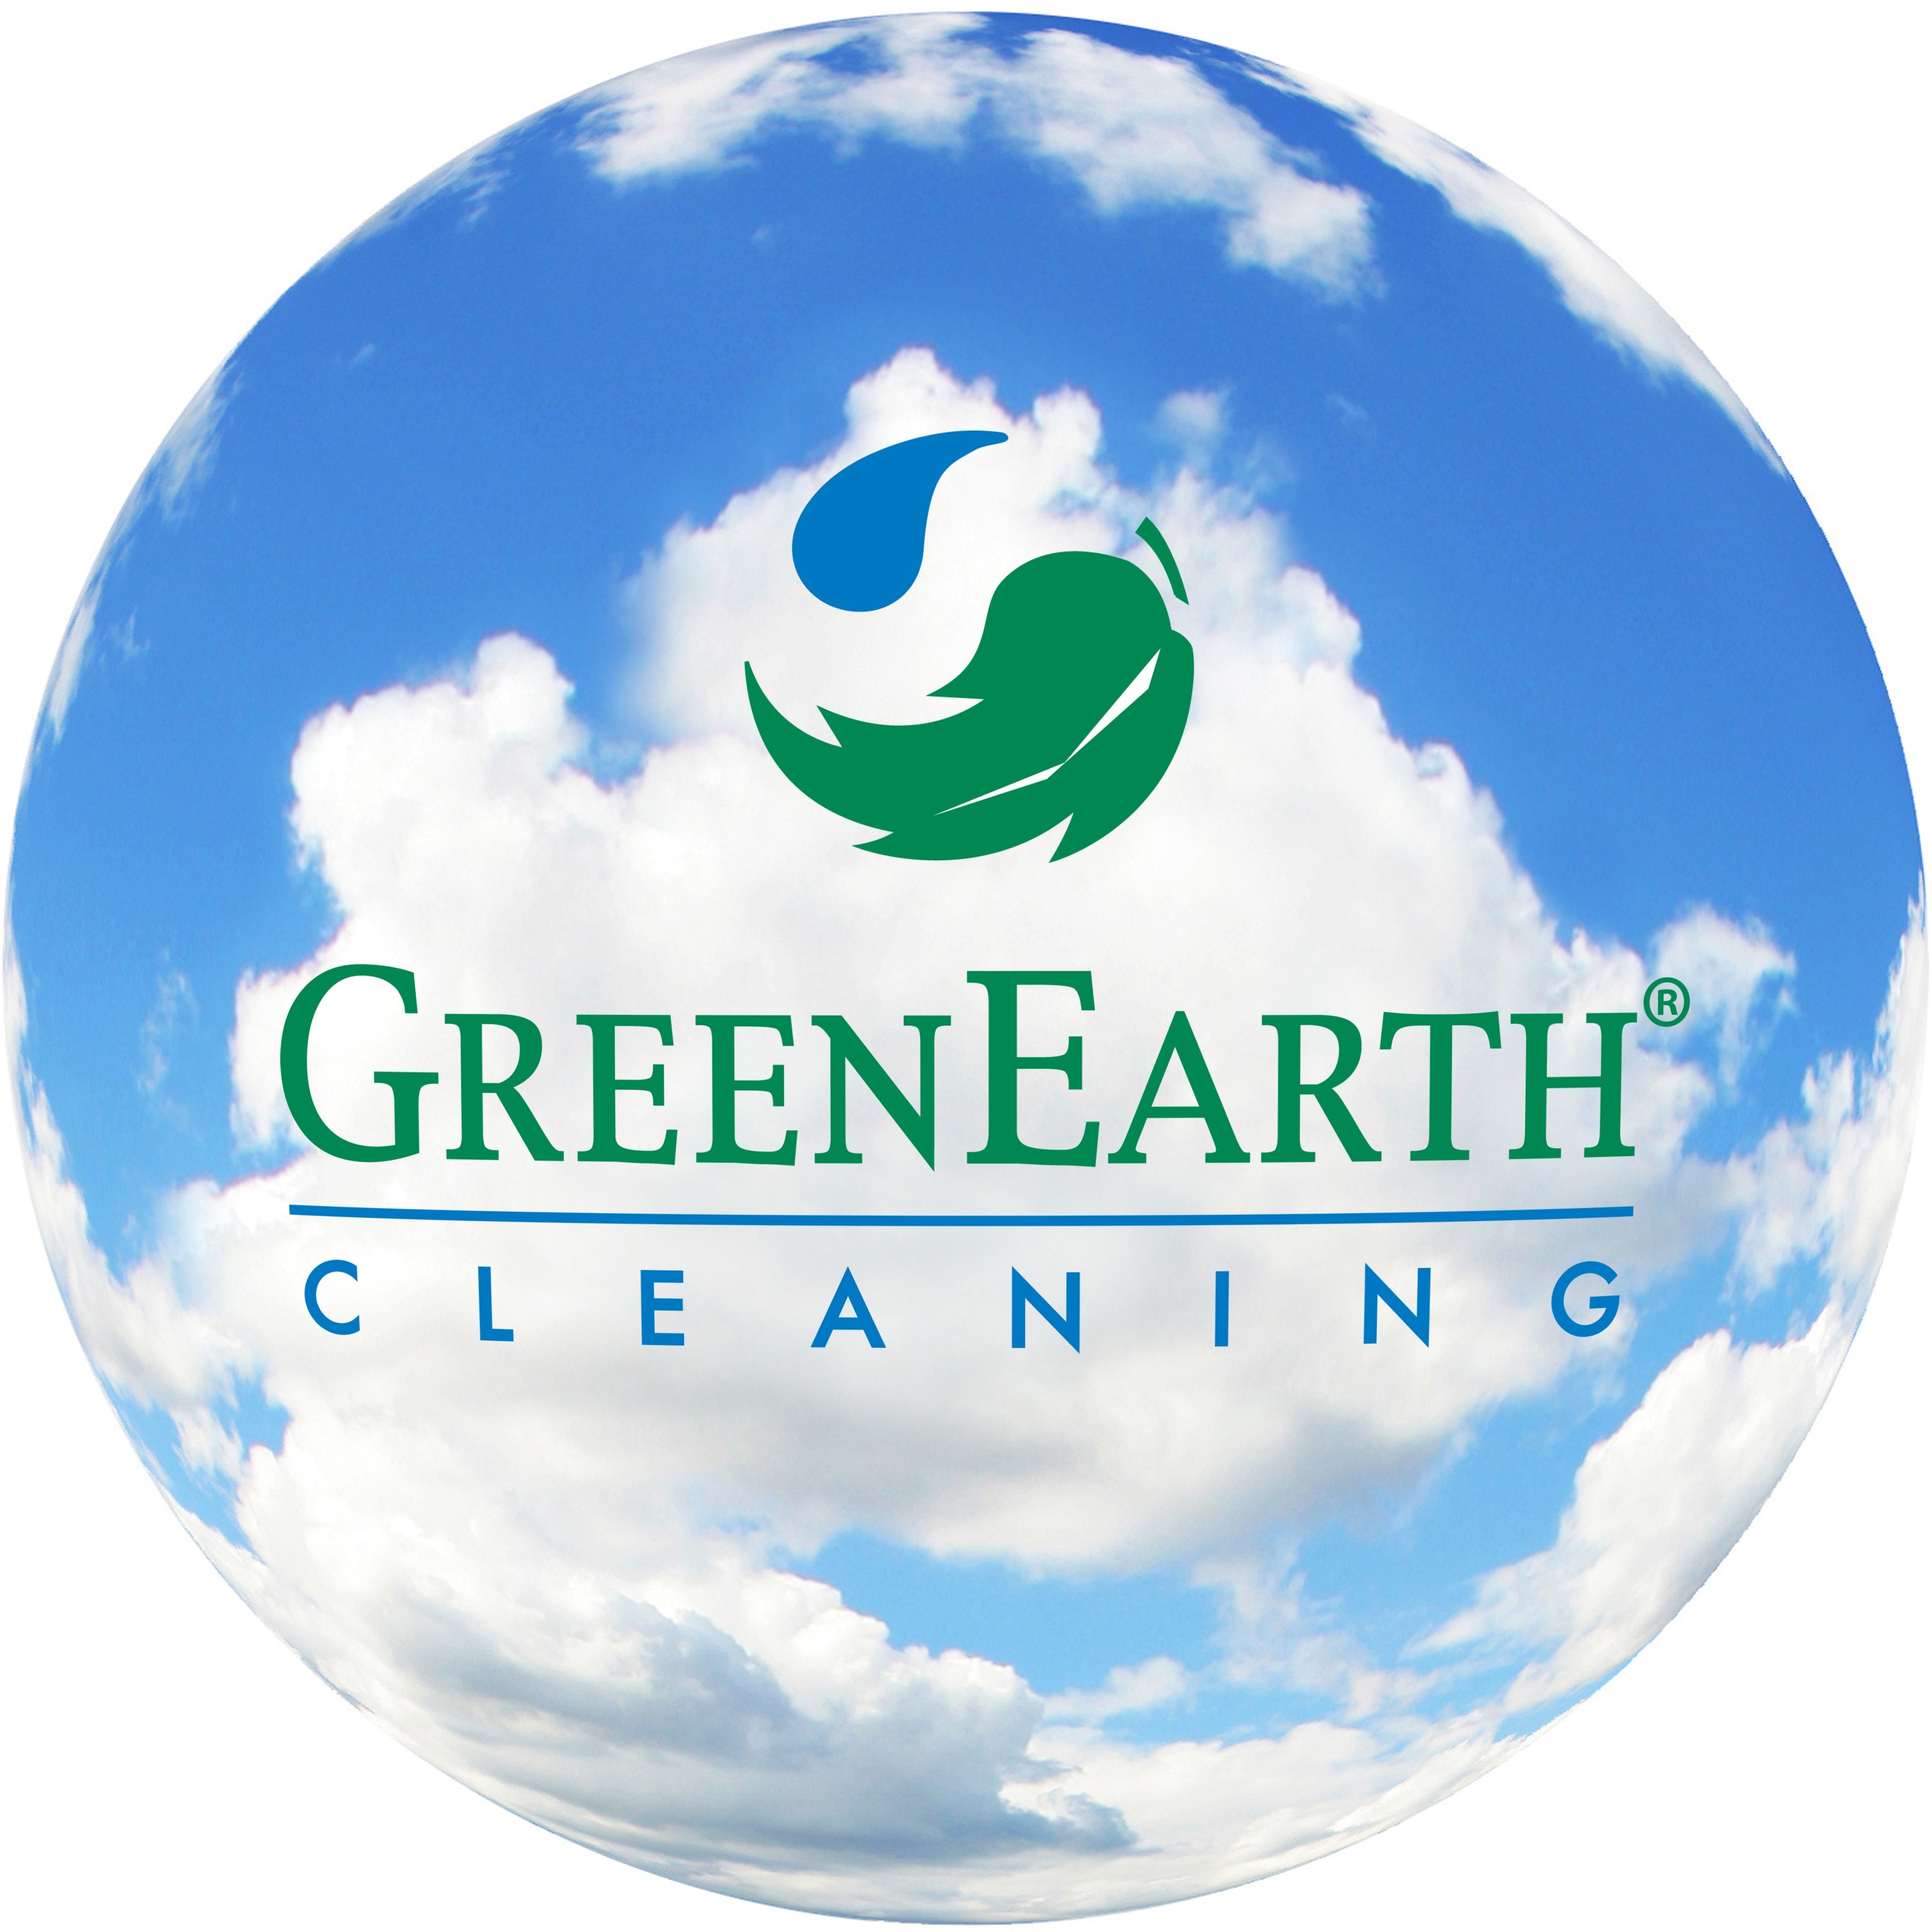 Impressive Cleaners and Laundry - Denver, CO, US, dry cleaners